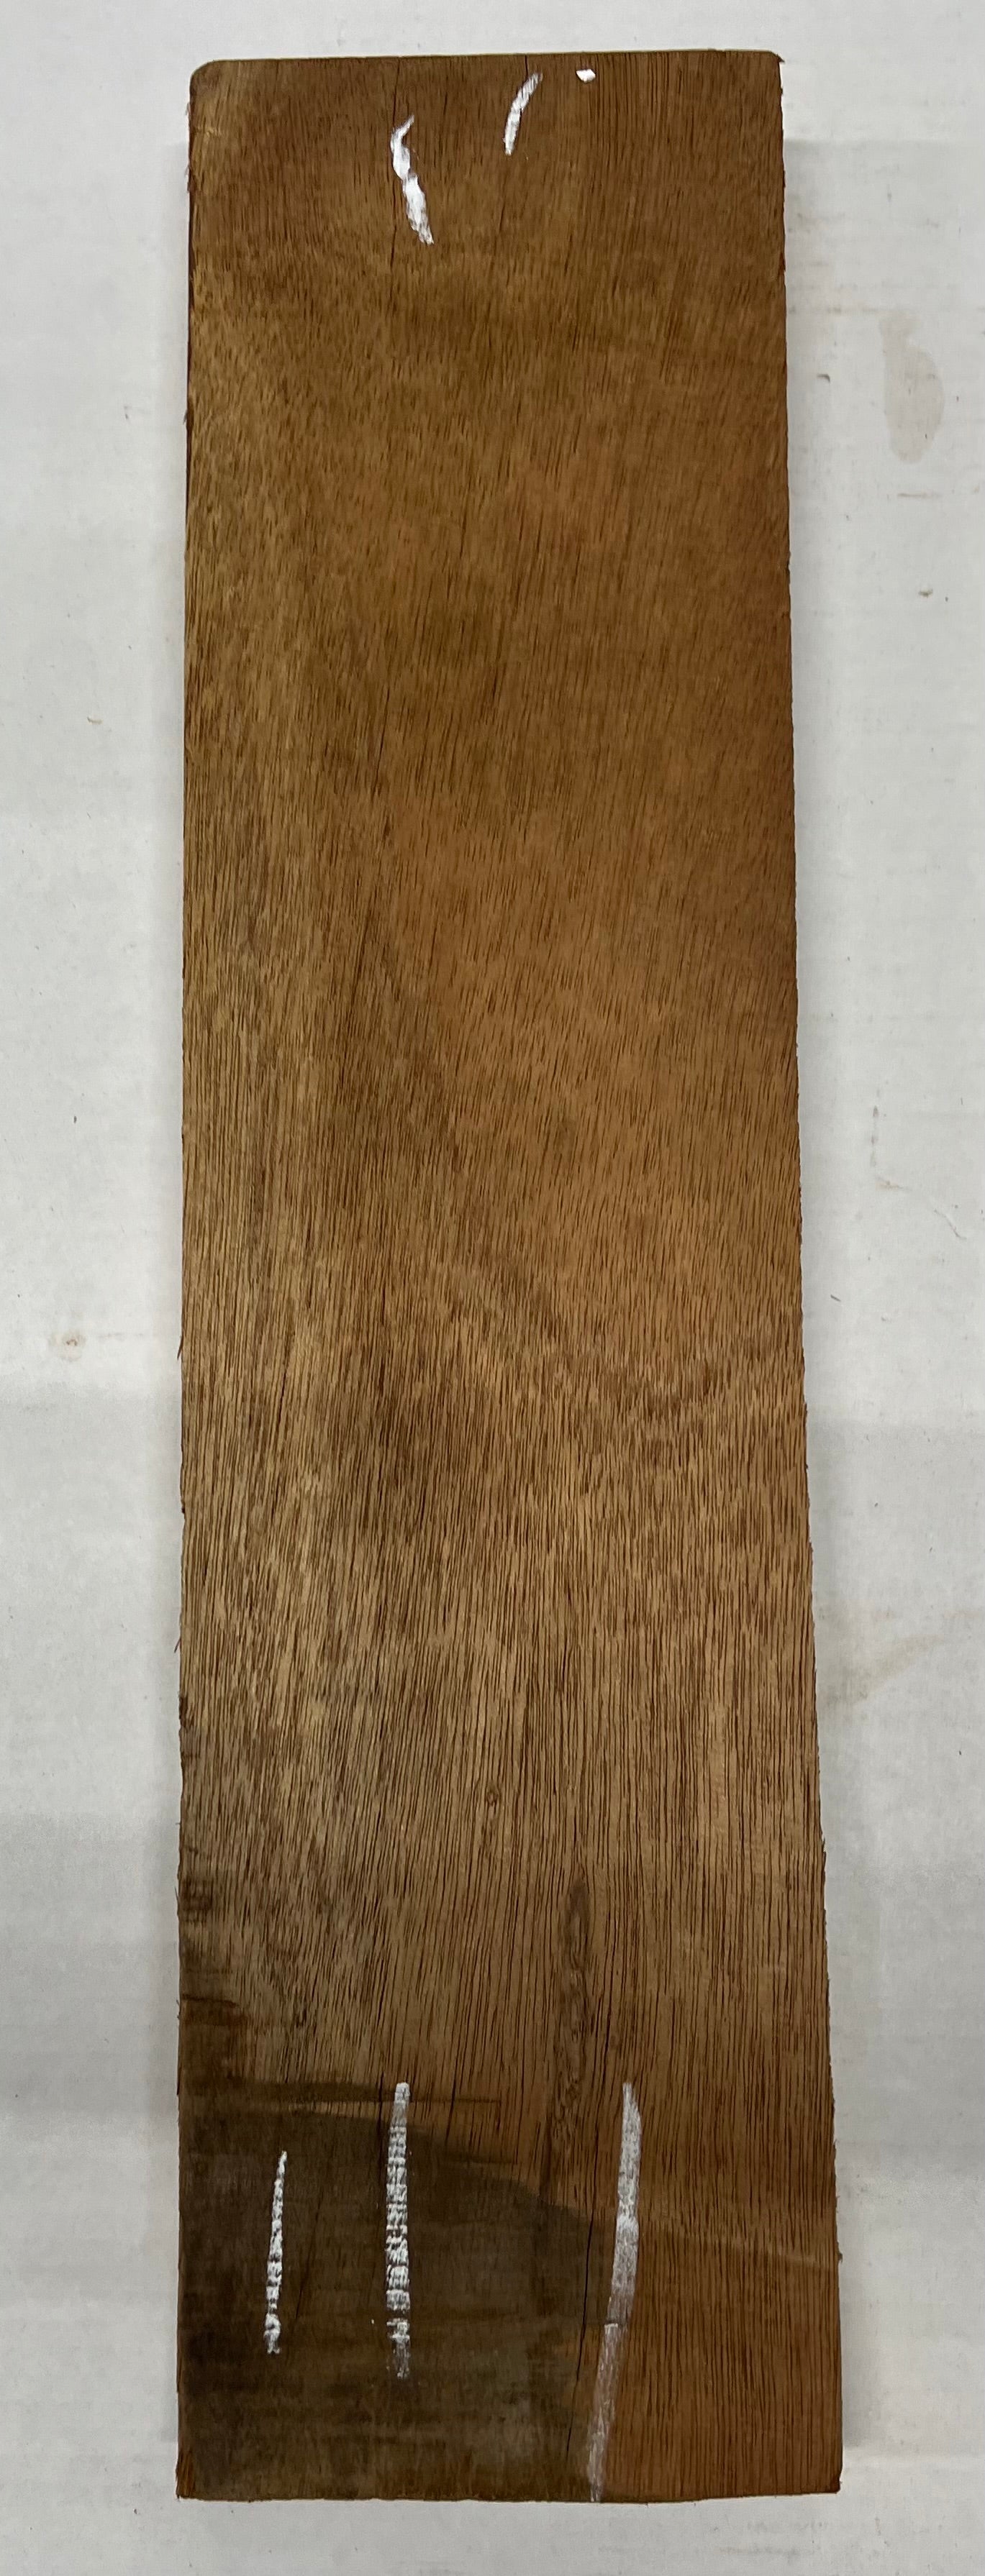 African Mahogany Lumber Board Square Wood Blank 24&quot;x6&quot;x1-3/4&quot;  